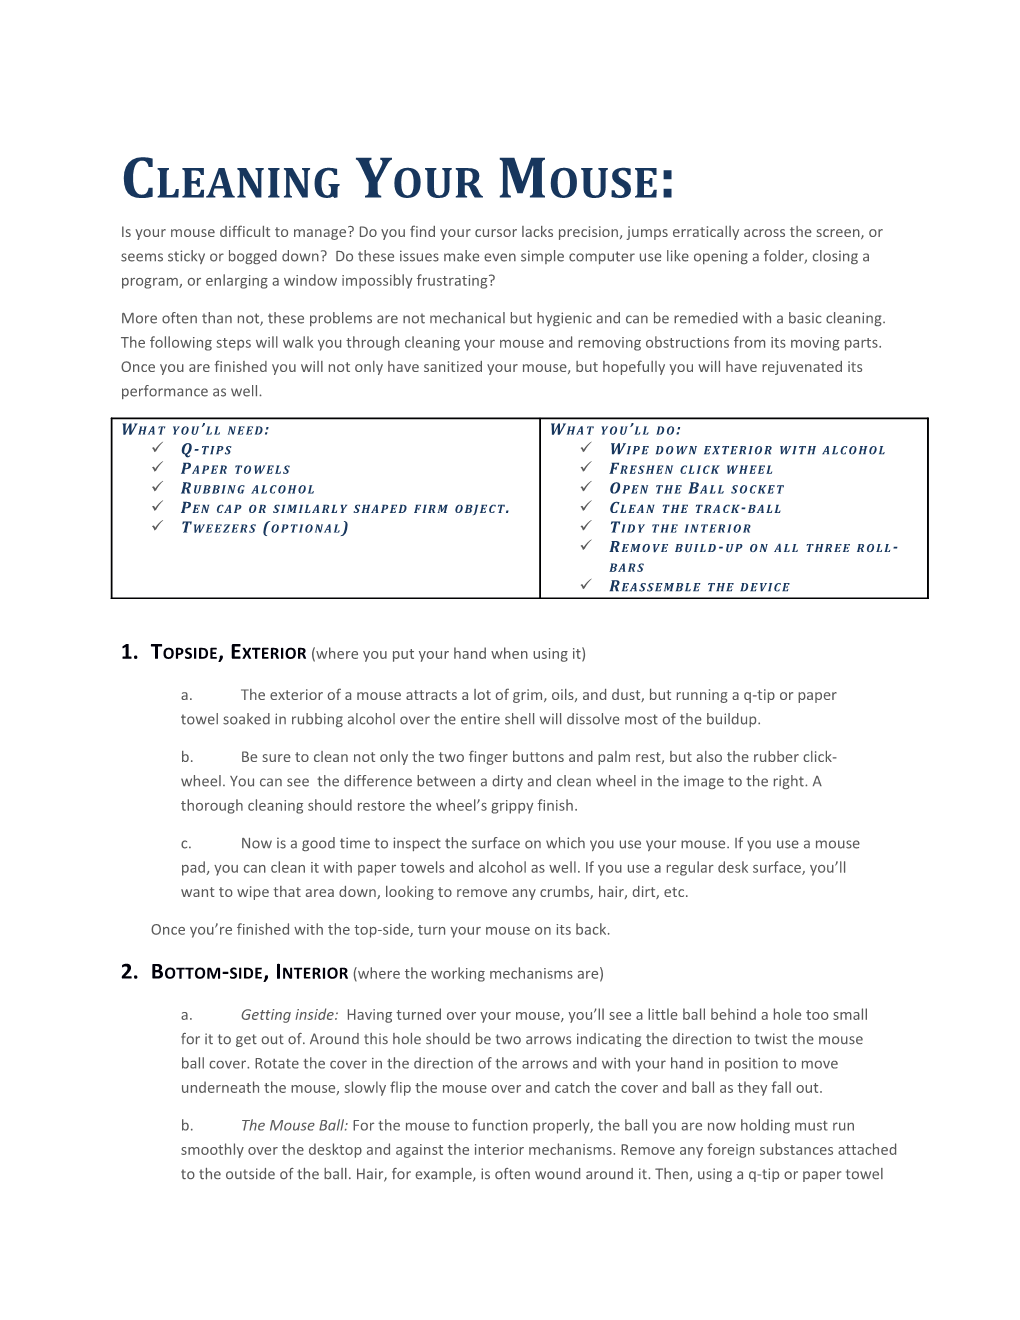 Cleaning Your Mouse